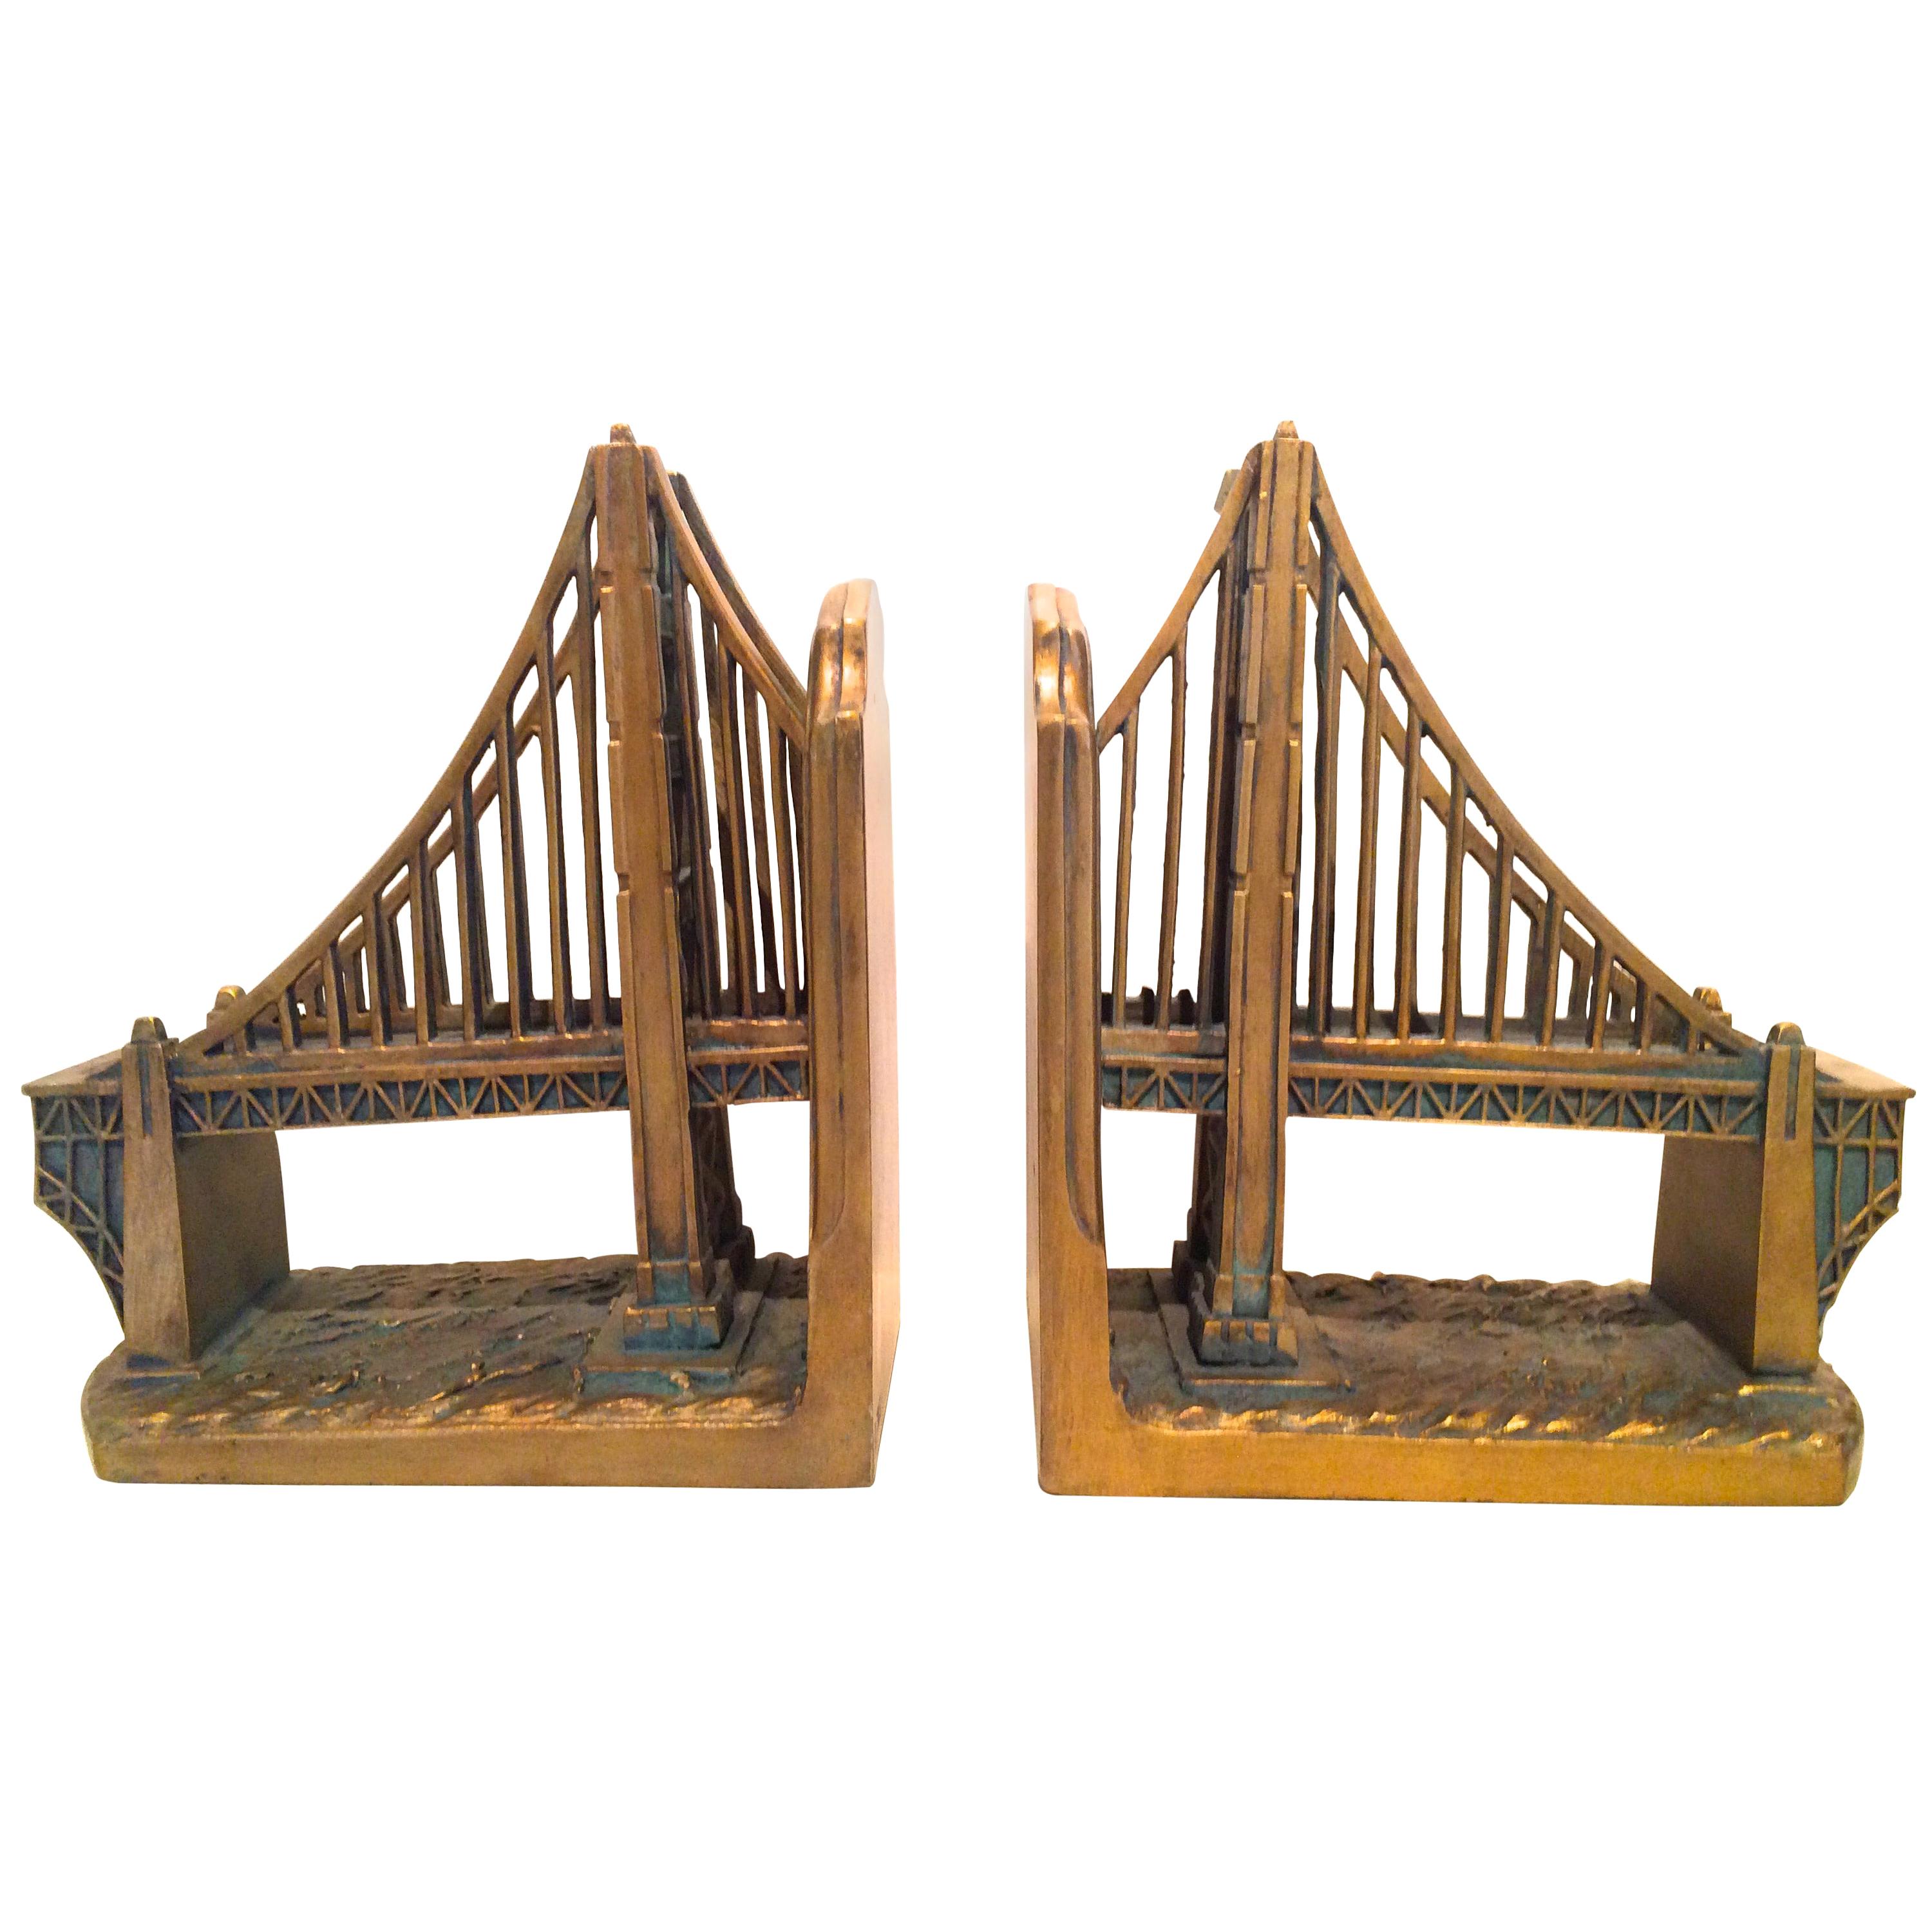 Pair of Gilt Bookends with Golden Gate Bridge Design